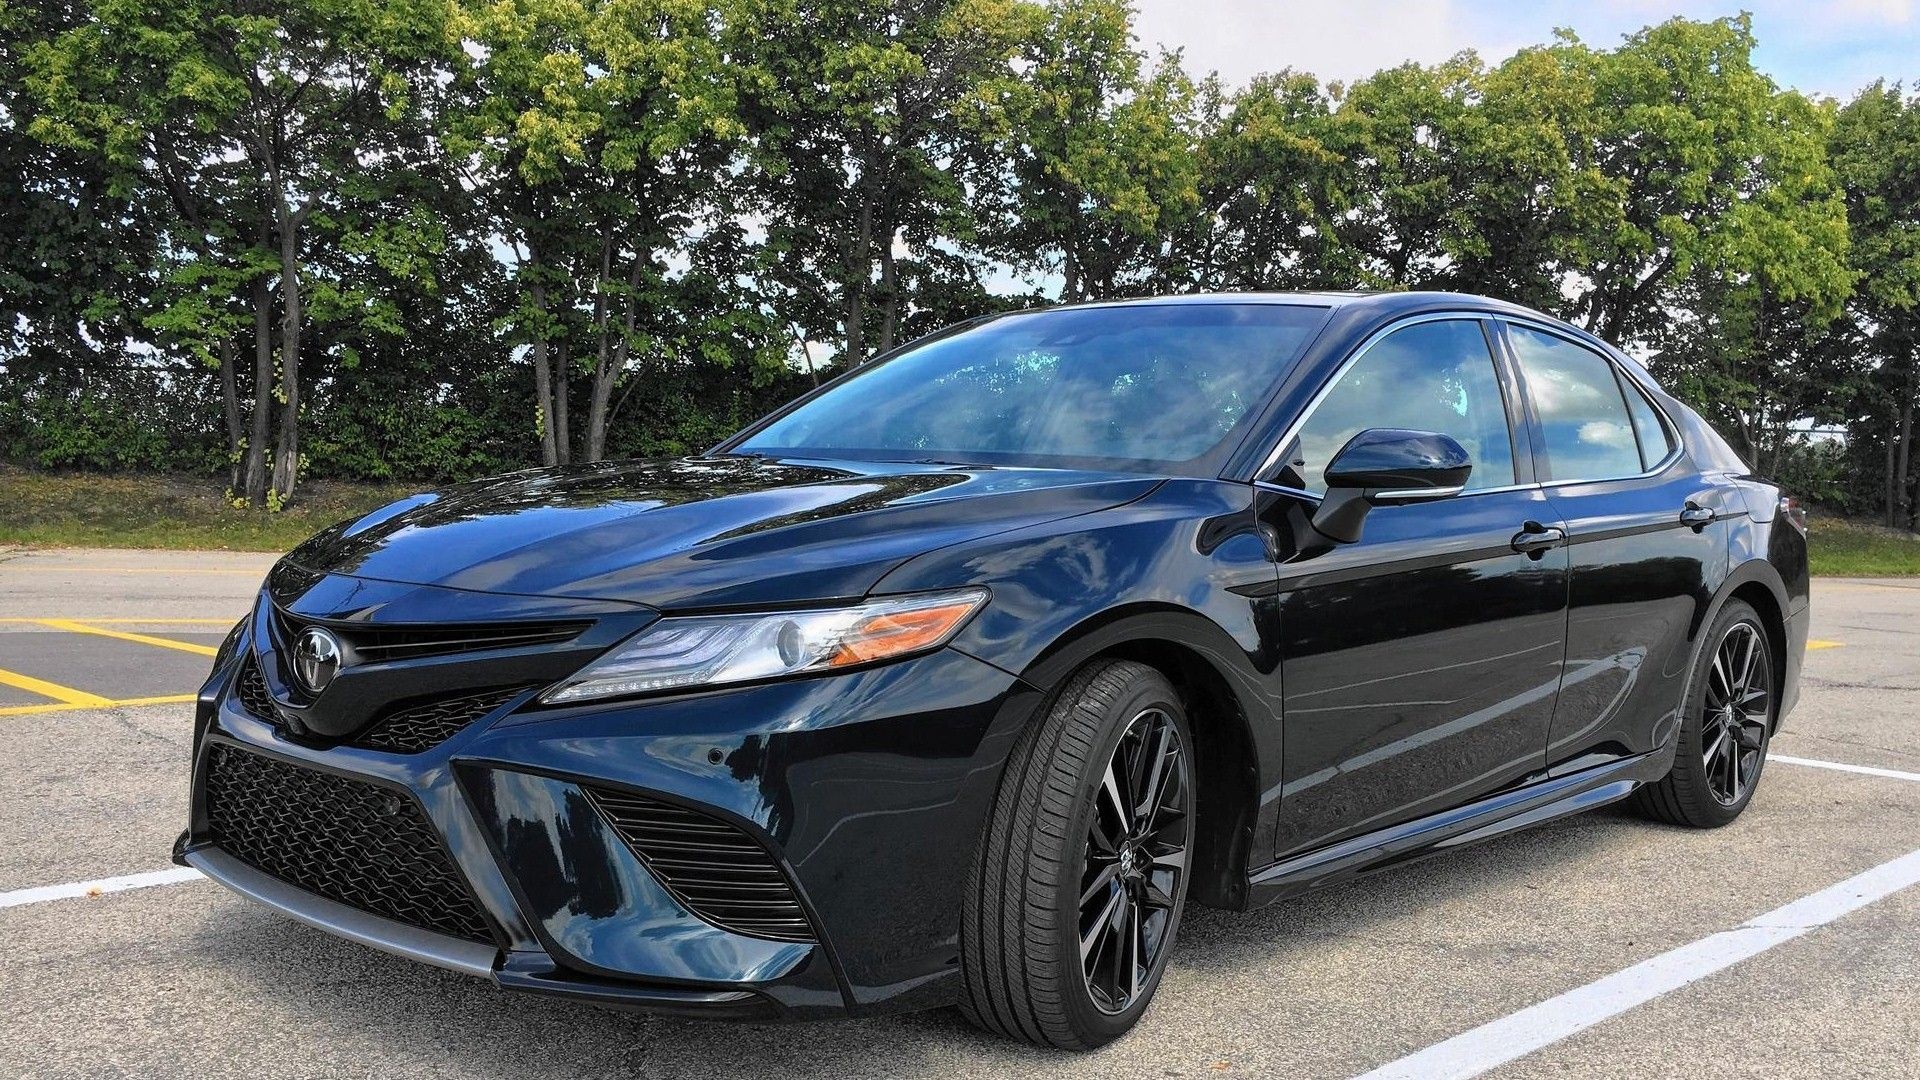 Toyota Camry, Black edition, Bold and powerful, Unmistakable presence, 1920x1080 Full HD Desktop